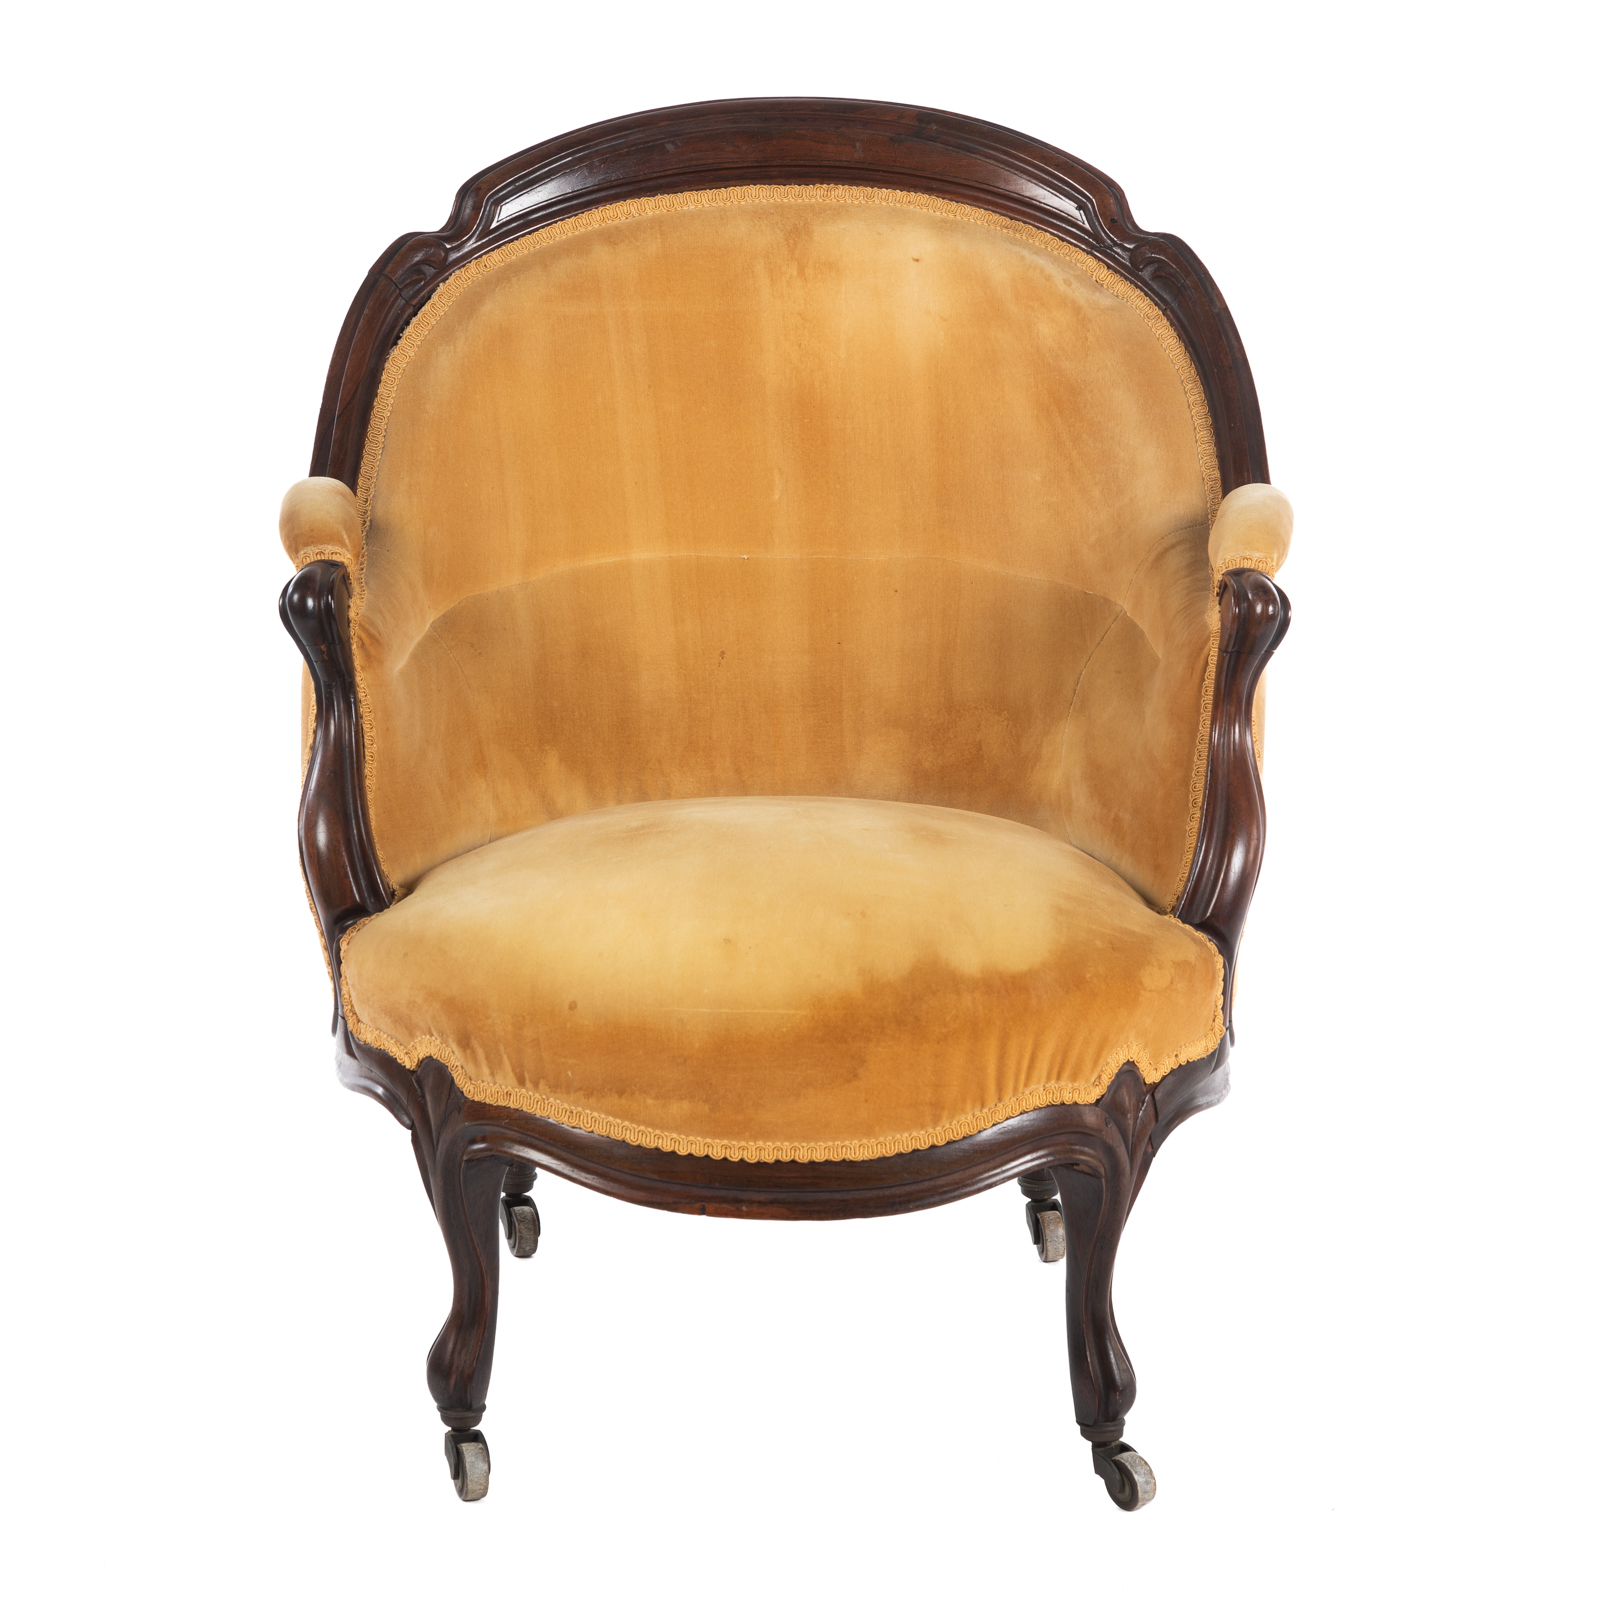 VICTORIAN UPHOLSTERED TUB CHAIR